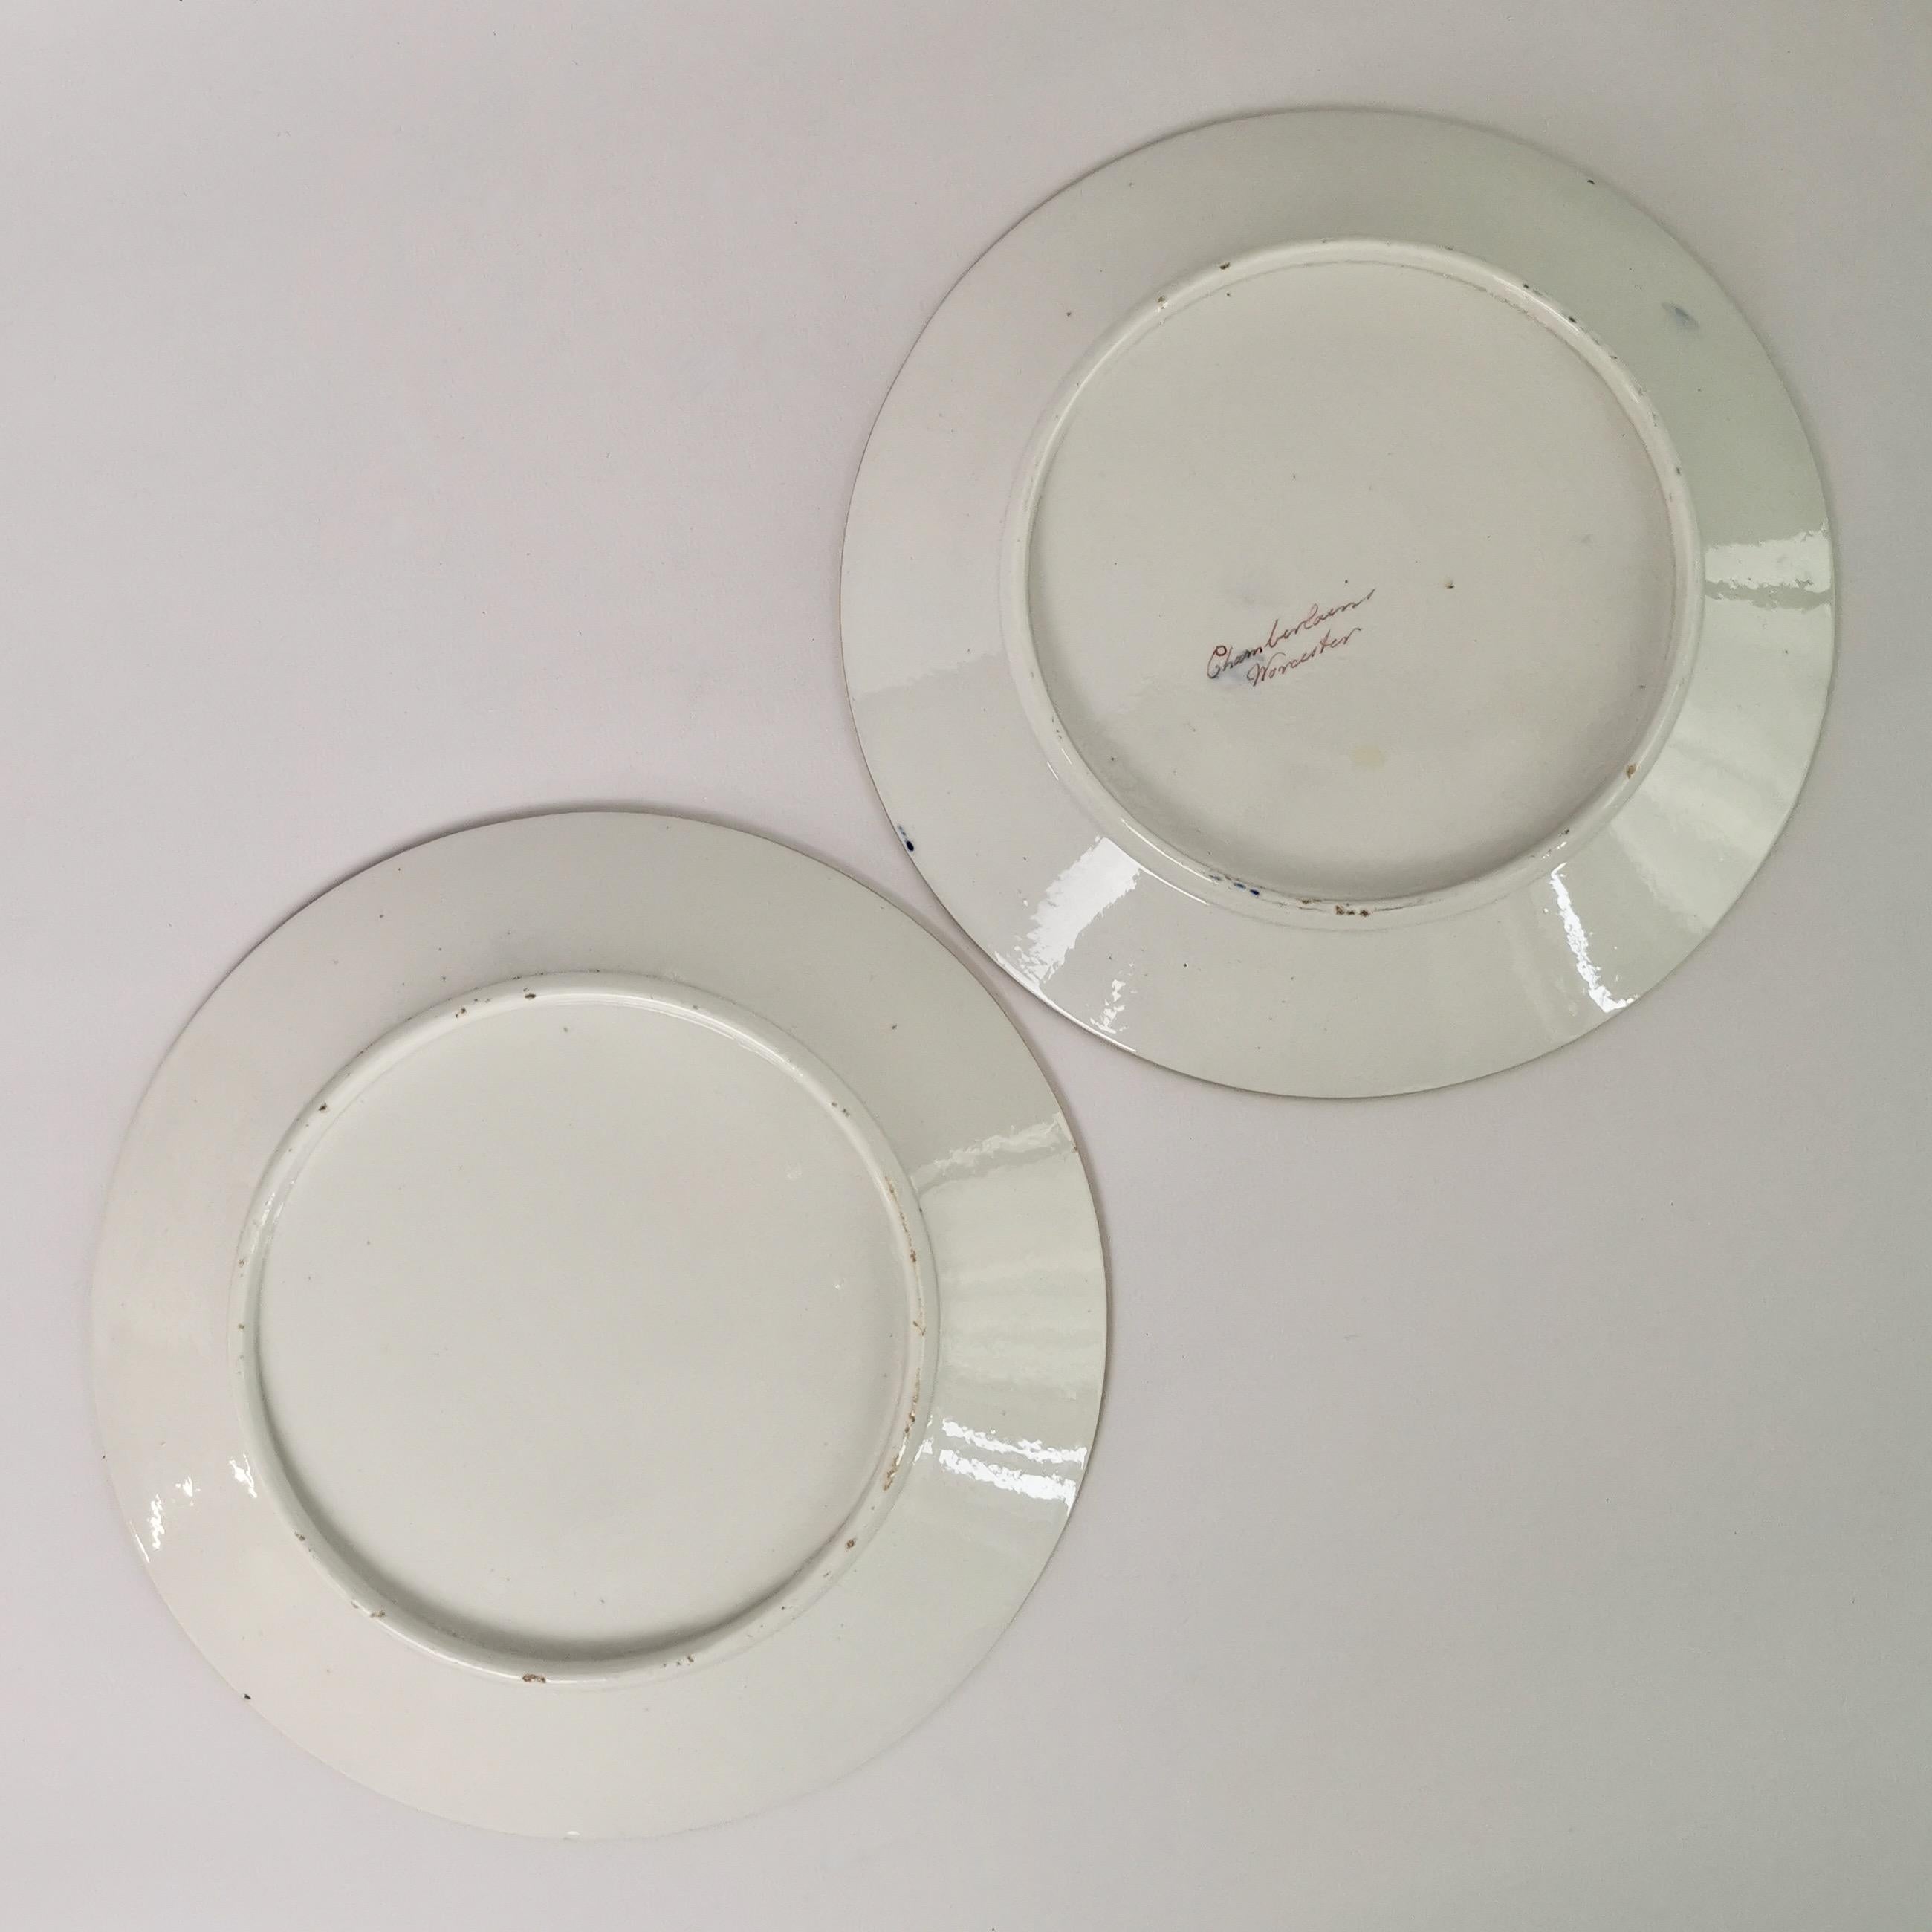 Chamberlains Worcester Pair of Porcelain Plates, Japan Pattern, ca 1805 6